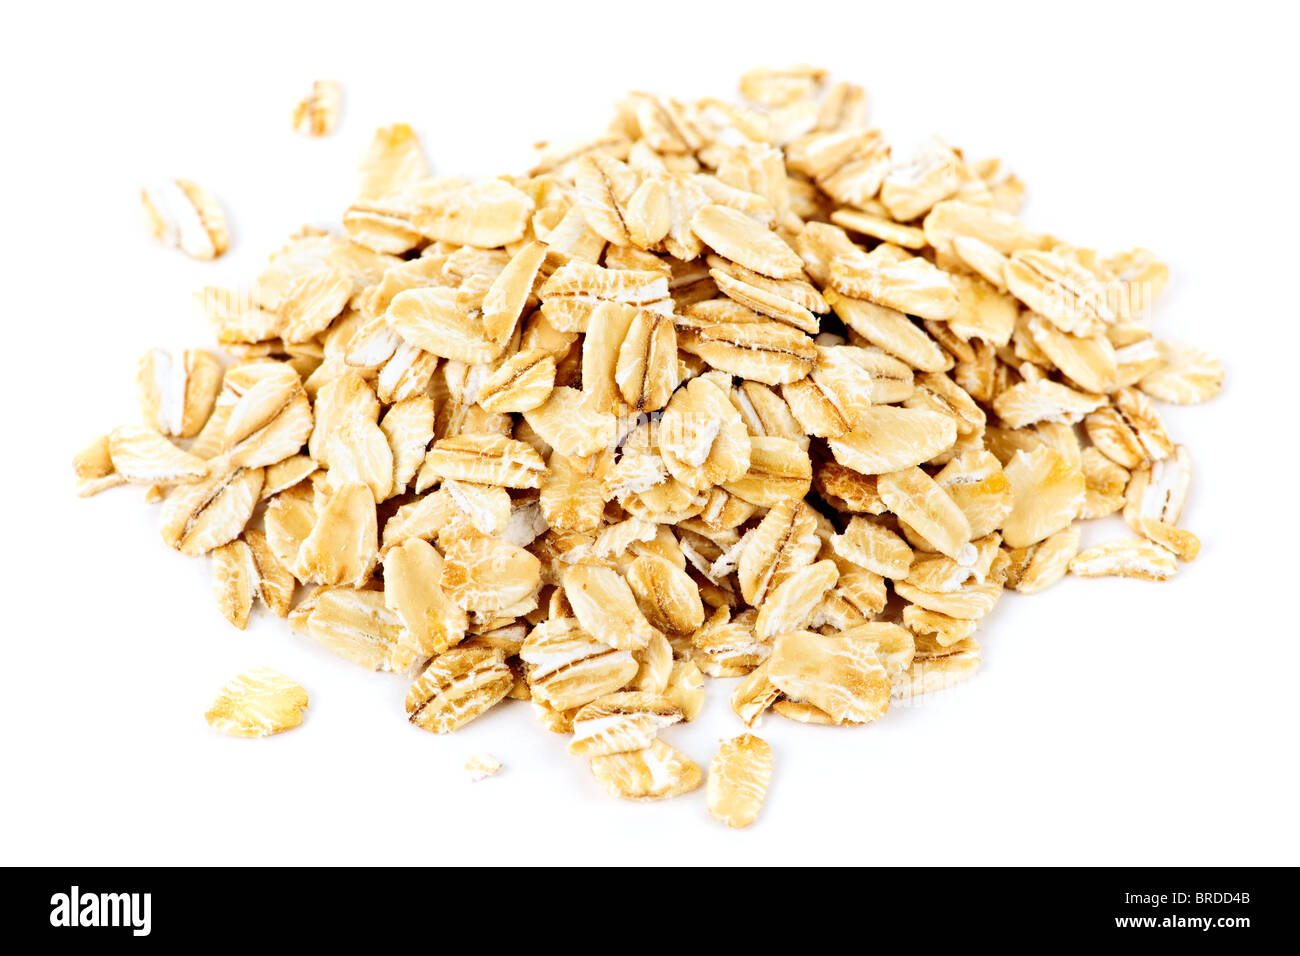 Heap of dry rolled oats isolated on white background Stock Photo